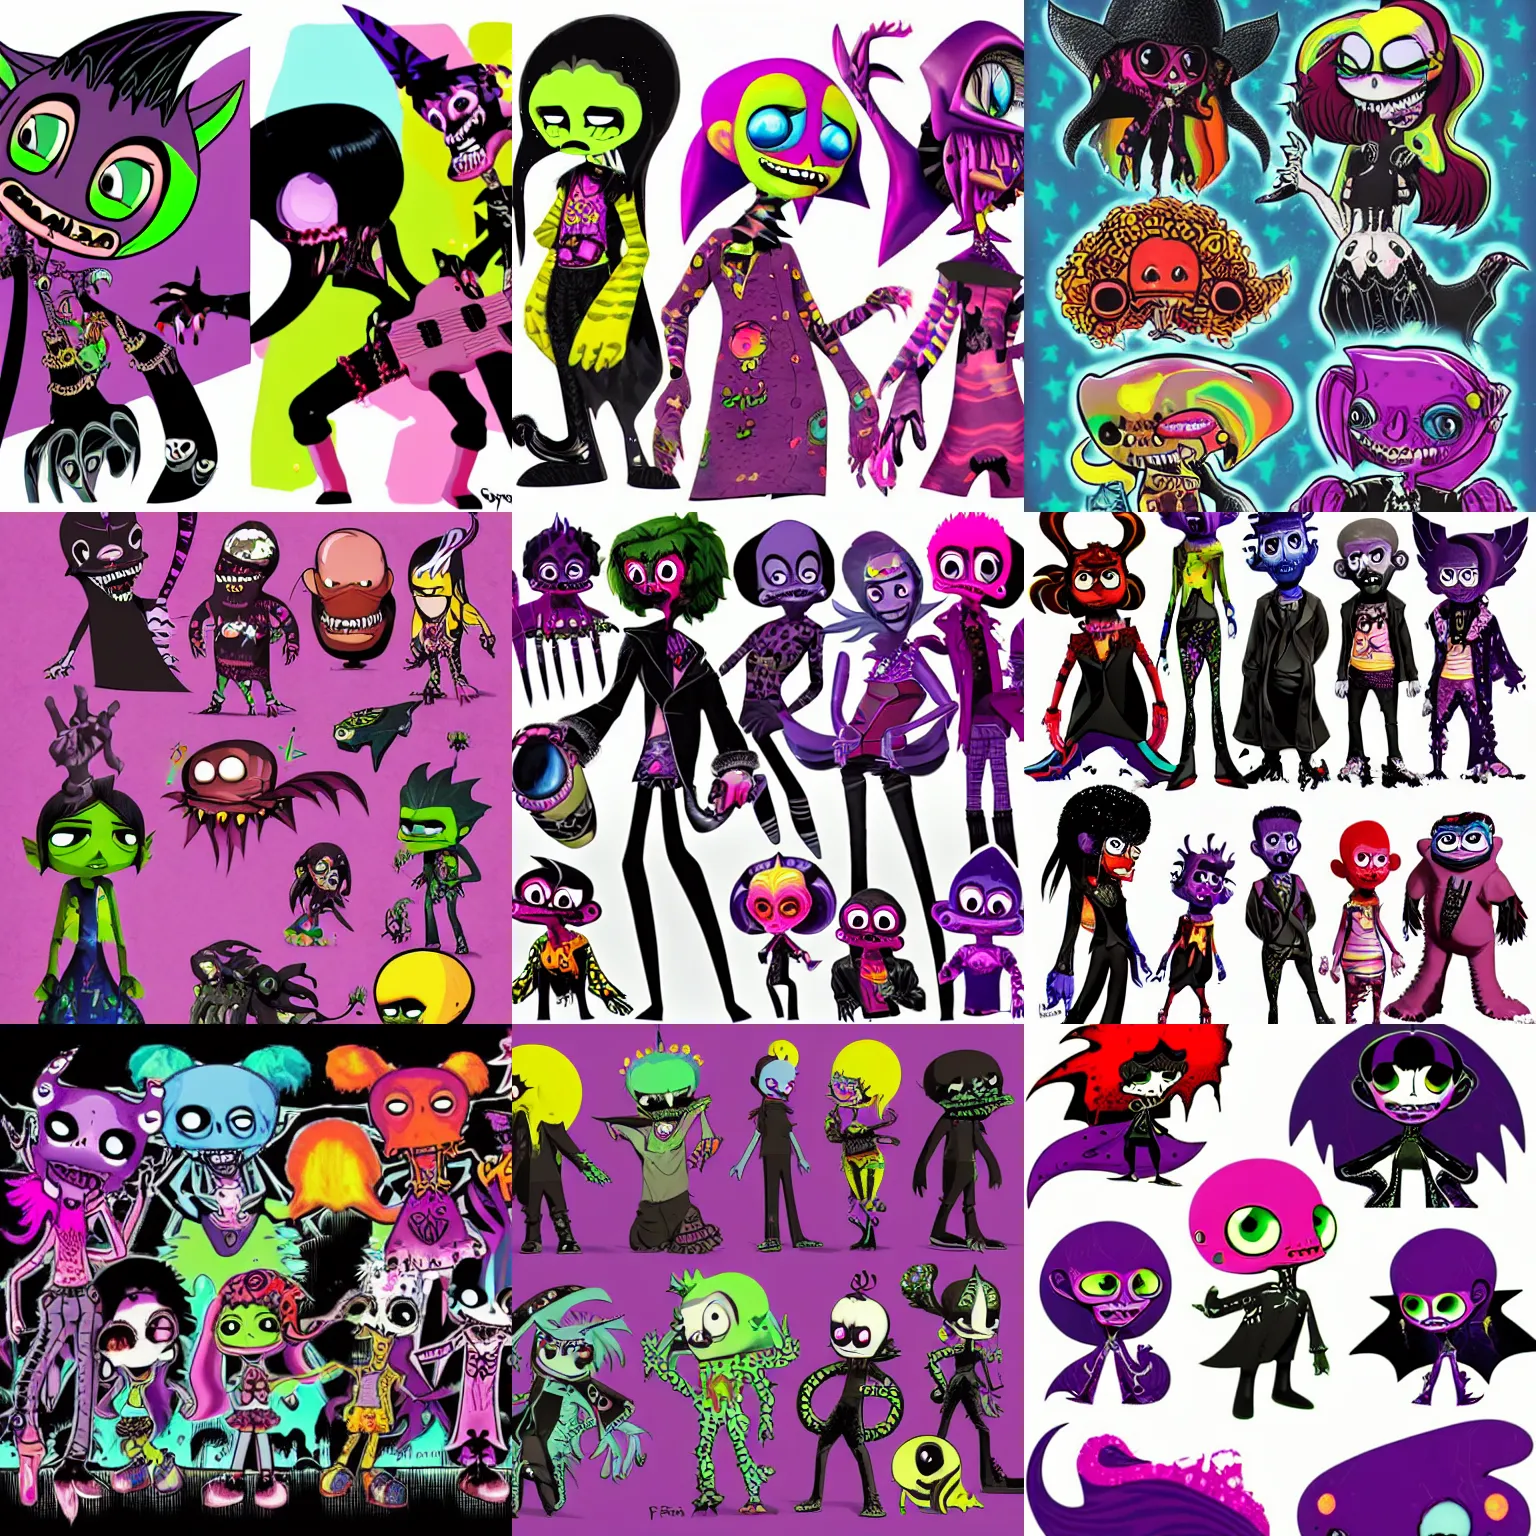 Prompt: lisa frank gothic punk vampiric rockstar vampire squid concept character designs of various shapes and sizes by genndy tartakovsky and the creators of fret nice at pieces interactive and splatoon by nintendo and the psychonauts by doublefine tim shafer artists for the new hotel transylvania film managed by pixar and overseen by Jamie Hewlett from gorillaz